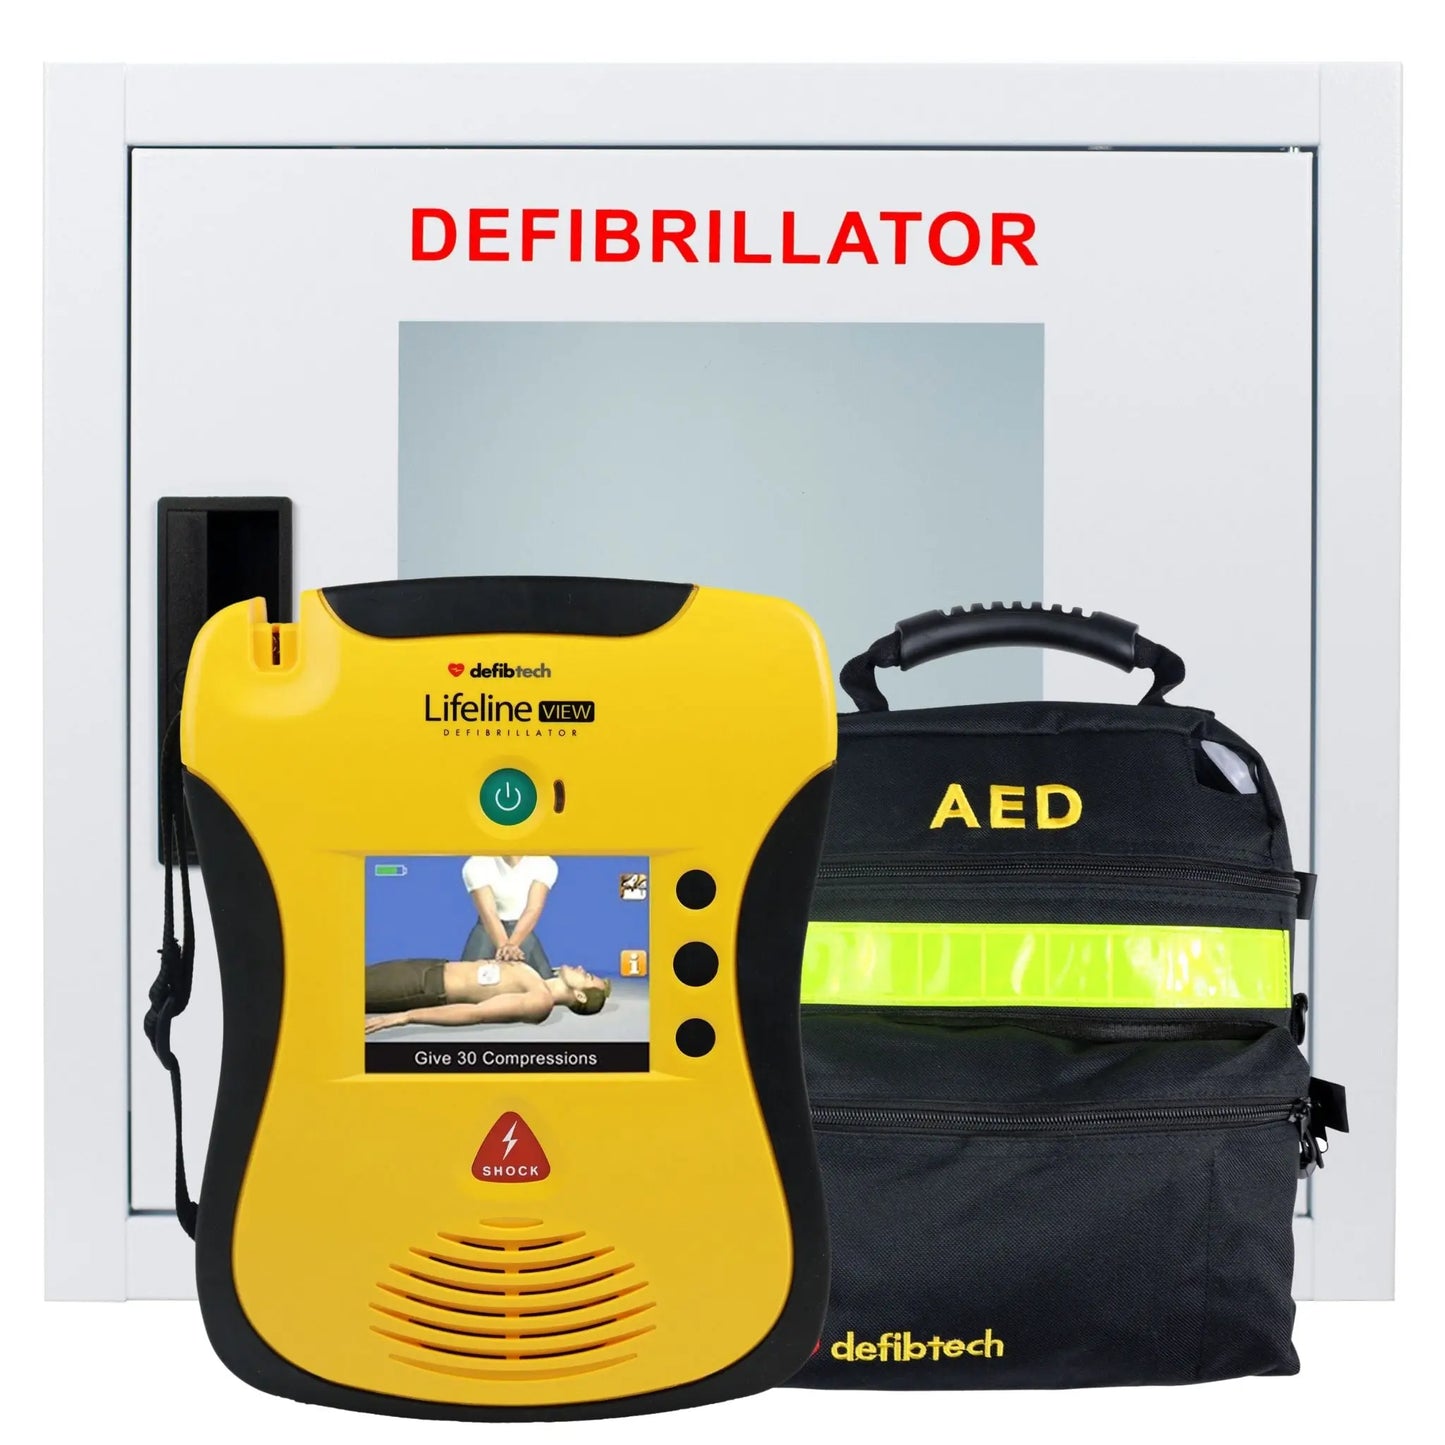 Defibtech Lifeline View AED Health Care Package - First Aid Market